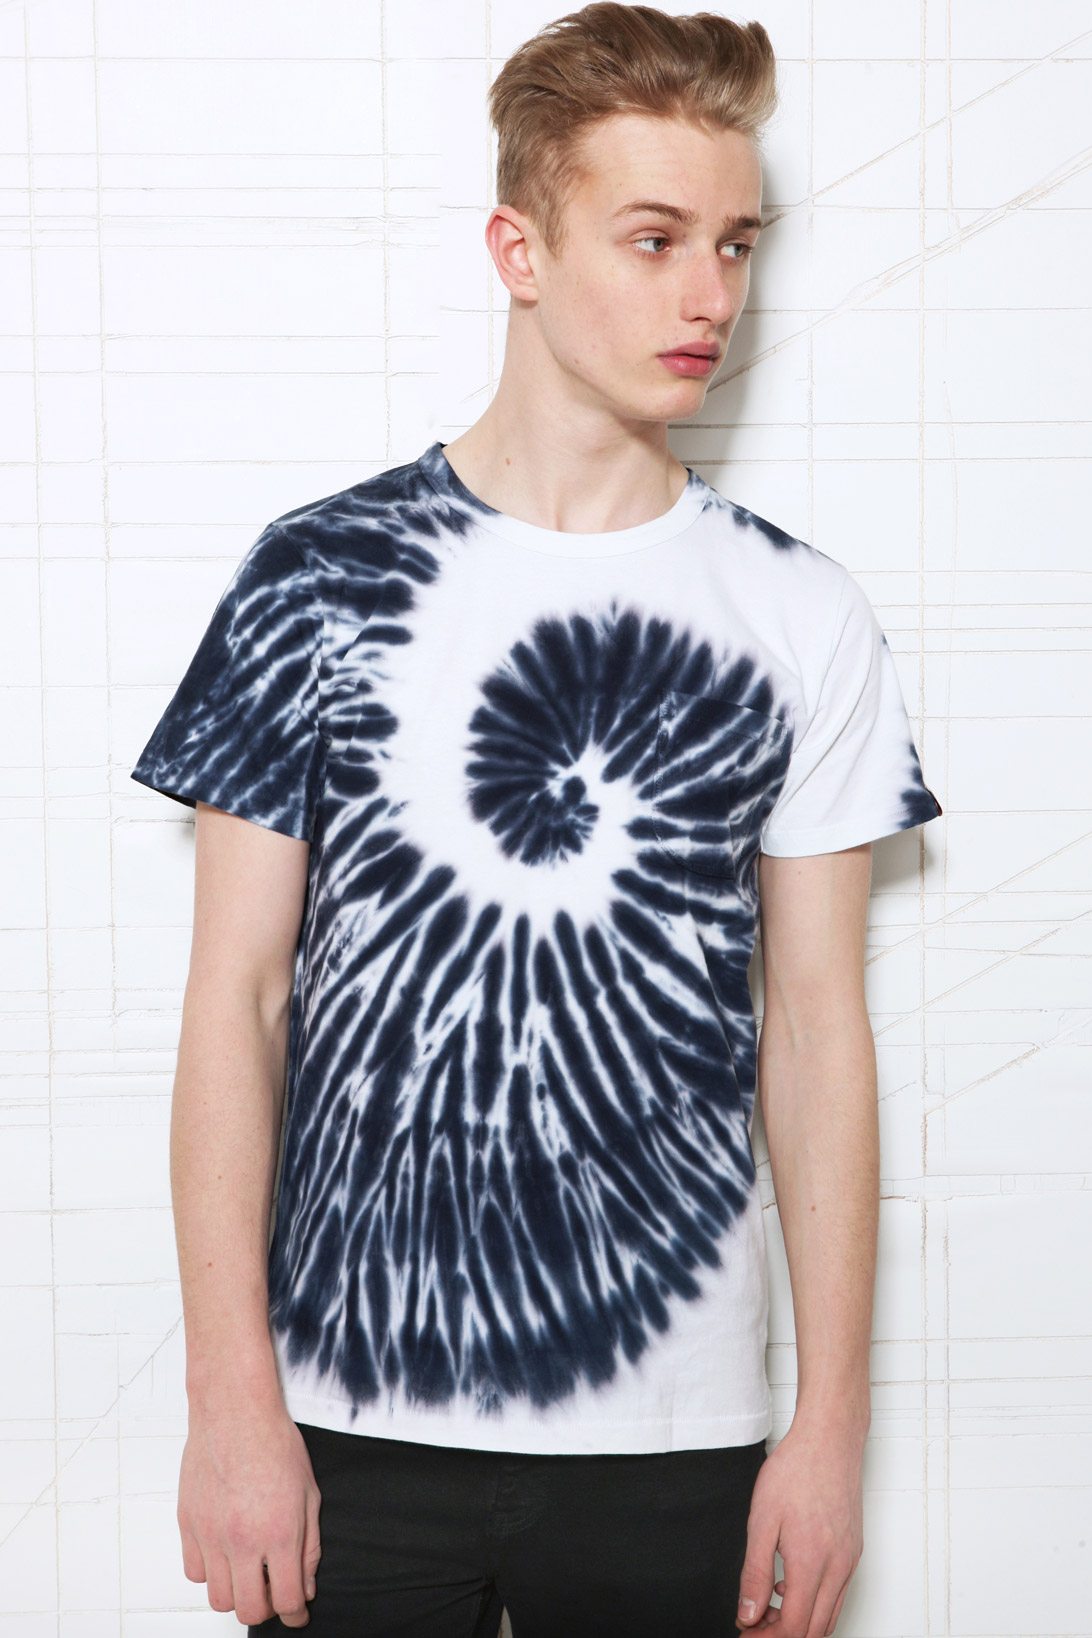 Worland-Urban-Outfitters-Tie-Dye-T-shirt-Blue-White